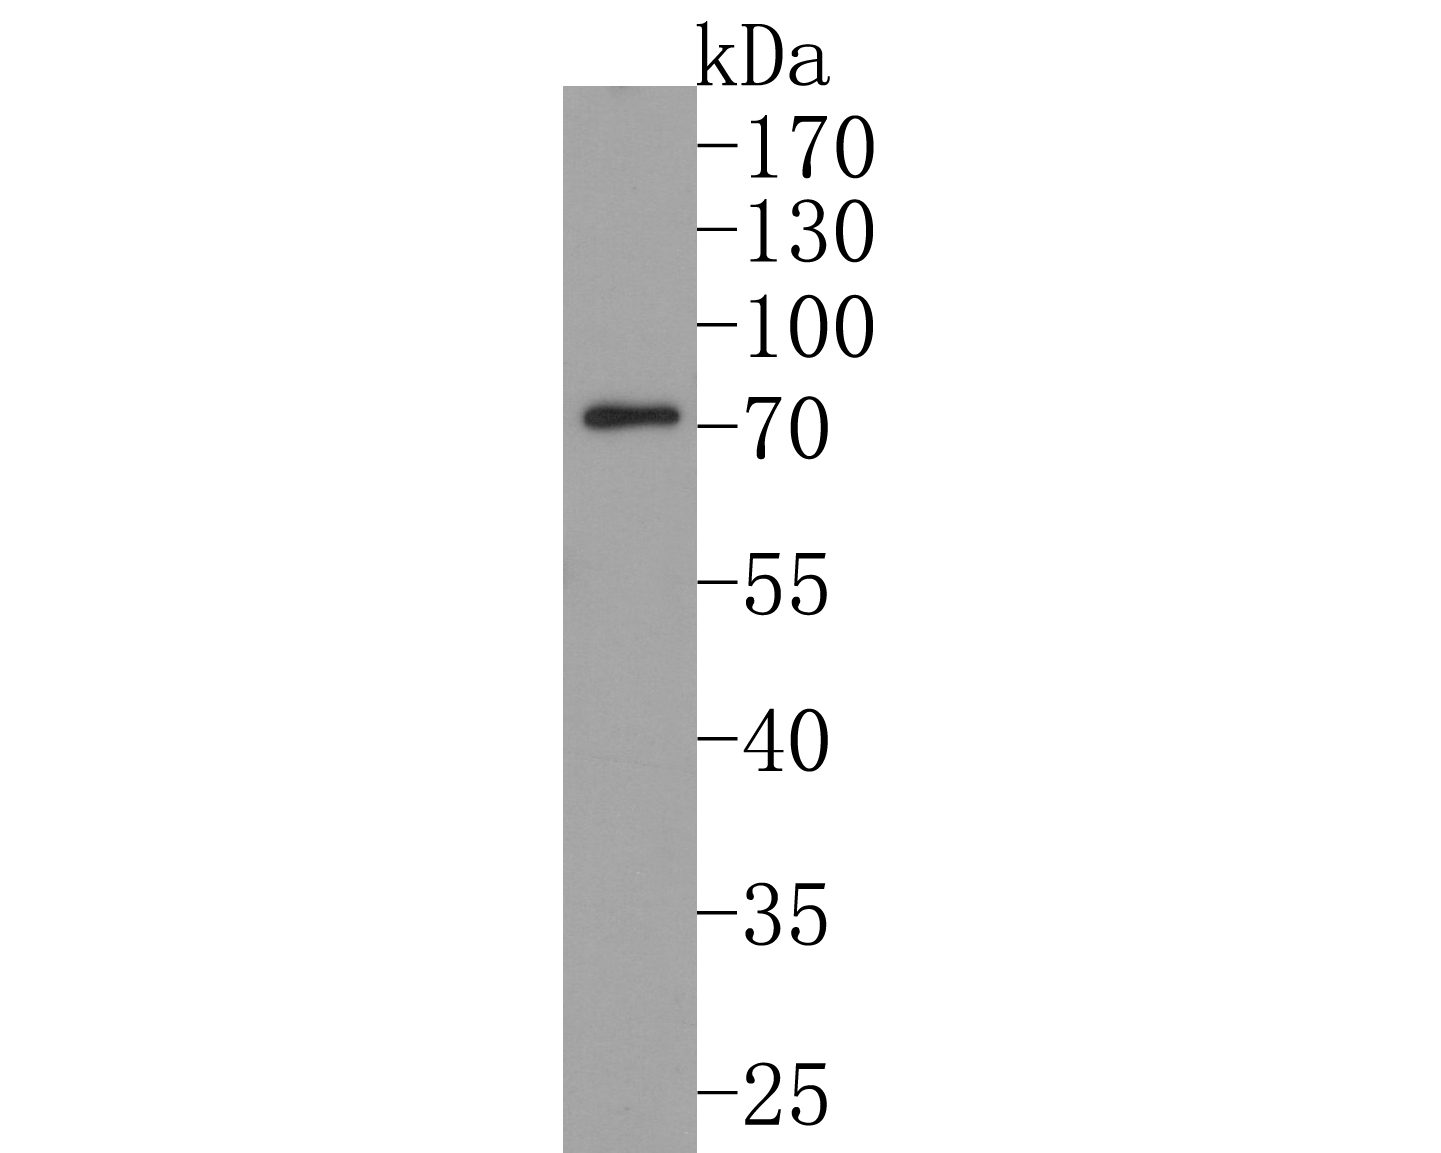 Western blot analysis of STAM1 on mouse small intestine tissue lysates. Proteins were transferred to a PVDF membrane and blocked with 5% BSA in PBS for 1 hour at room temperature. The primary antibody (HA500166, 1/500) was used in 5% BSA at room temperature for 2 hours. Goat Anti-Rabbit IgG - HRP Secondary Antibody (HA1001) at 1:200,000 dilution was used for 1 hour at room temperature.<br />
<br />
Predicted band size: 59 kDa<br />
Observed band size: 70 kDa